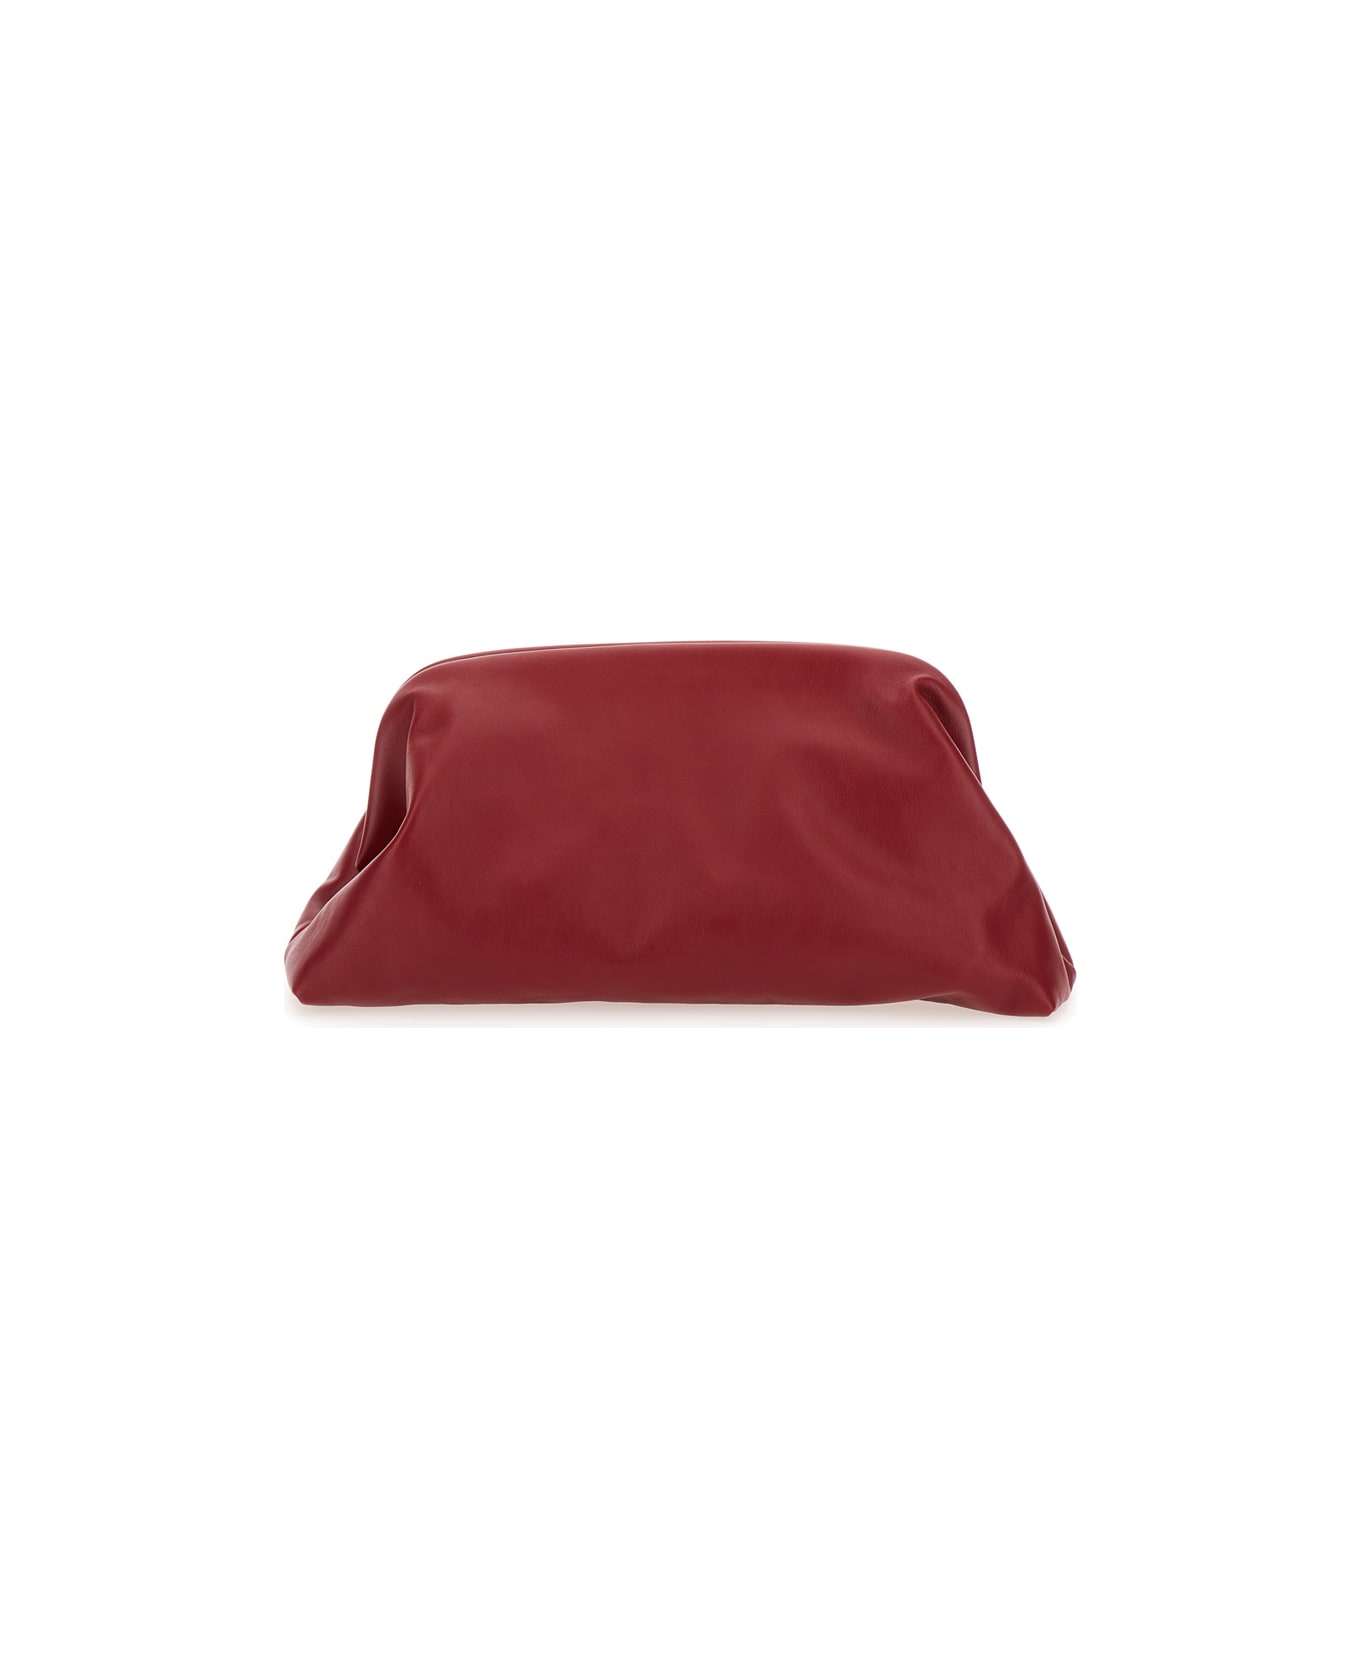 Philosophy di Lorenzo Serafini 'lauren' Bordeaux Maxi Clutch With Magnetic Closure In Leather Woman - Red トートバッグ